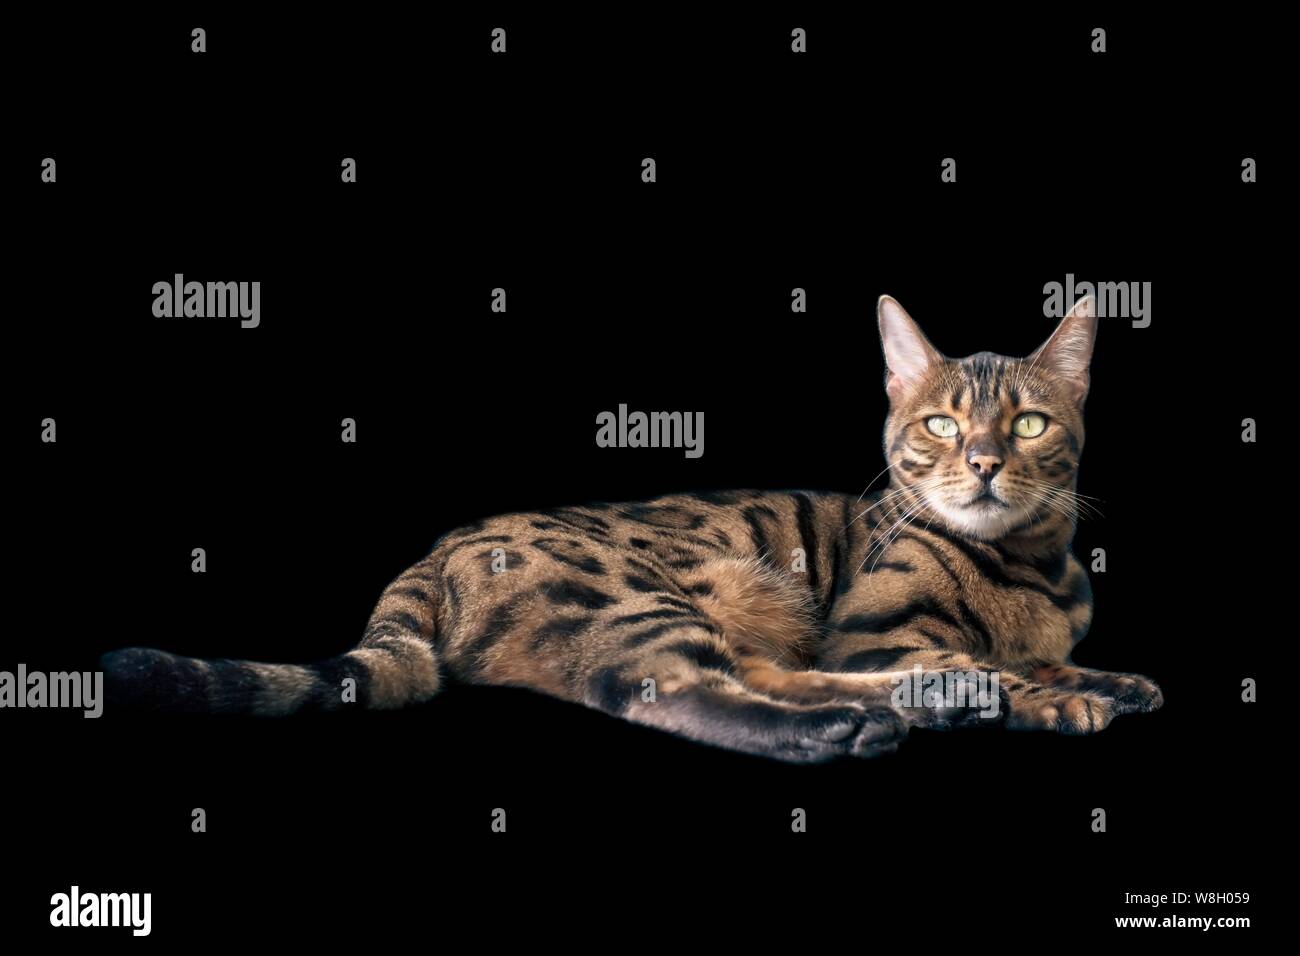 Bengal cat lying down and looking at amera. Isolated on black background. Stock Photo